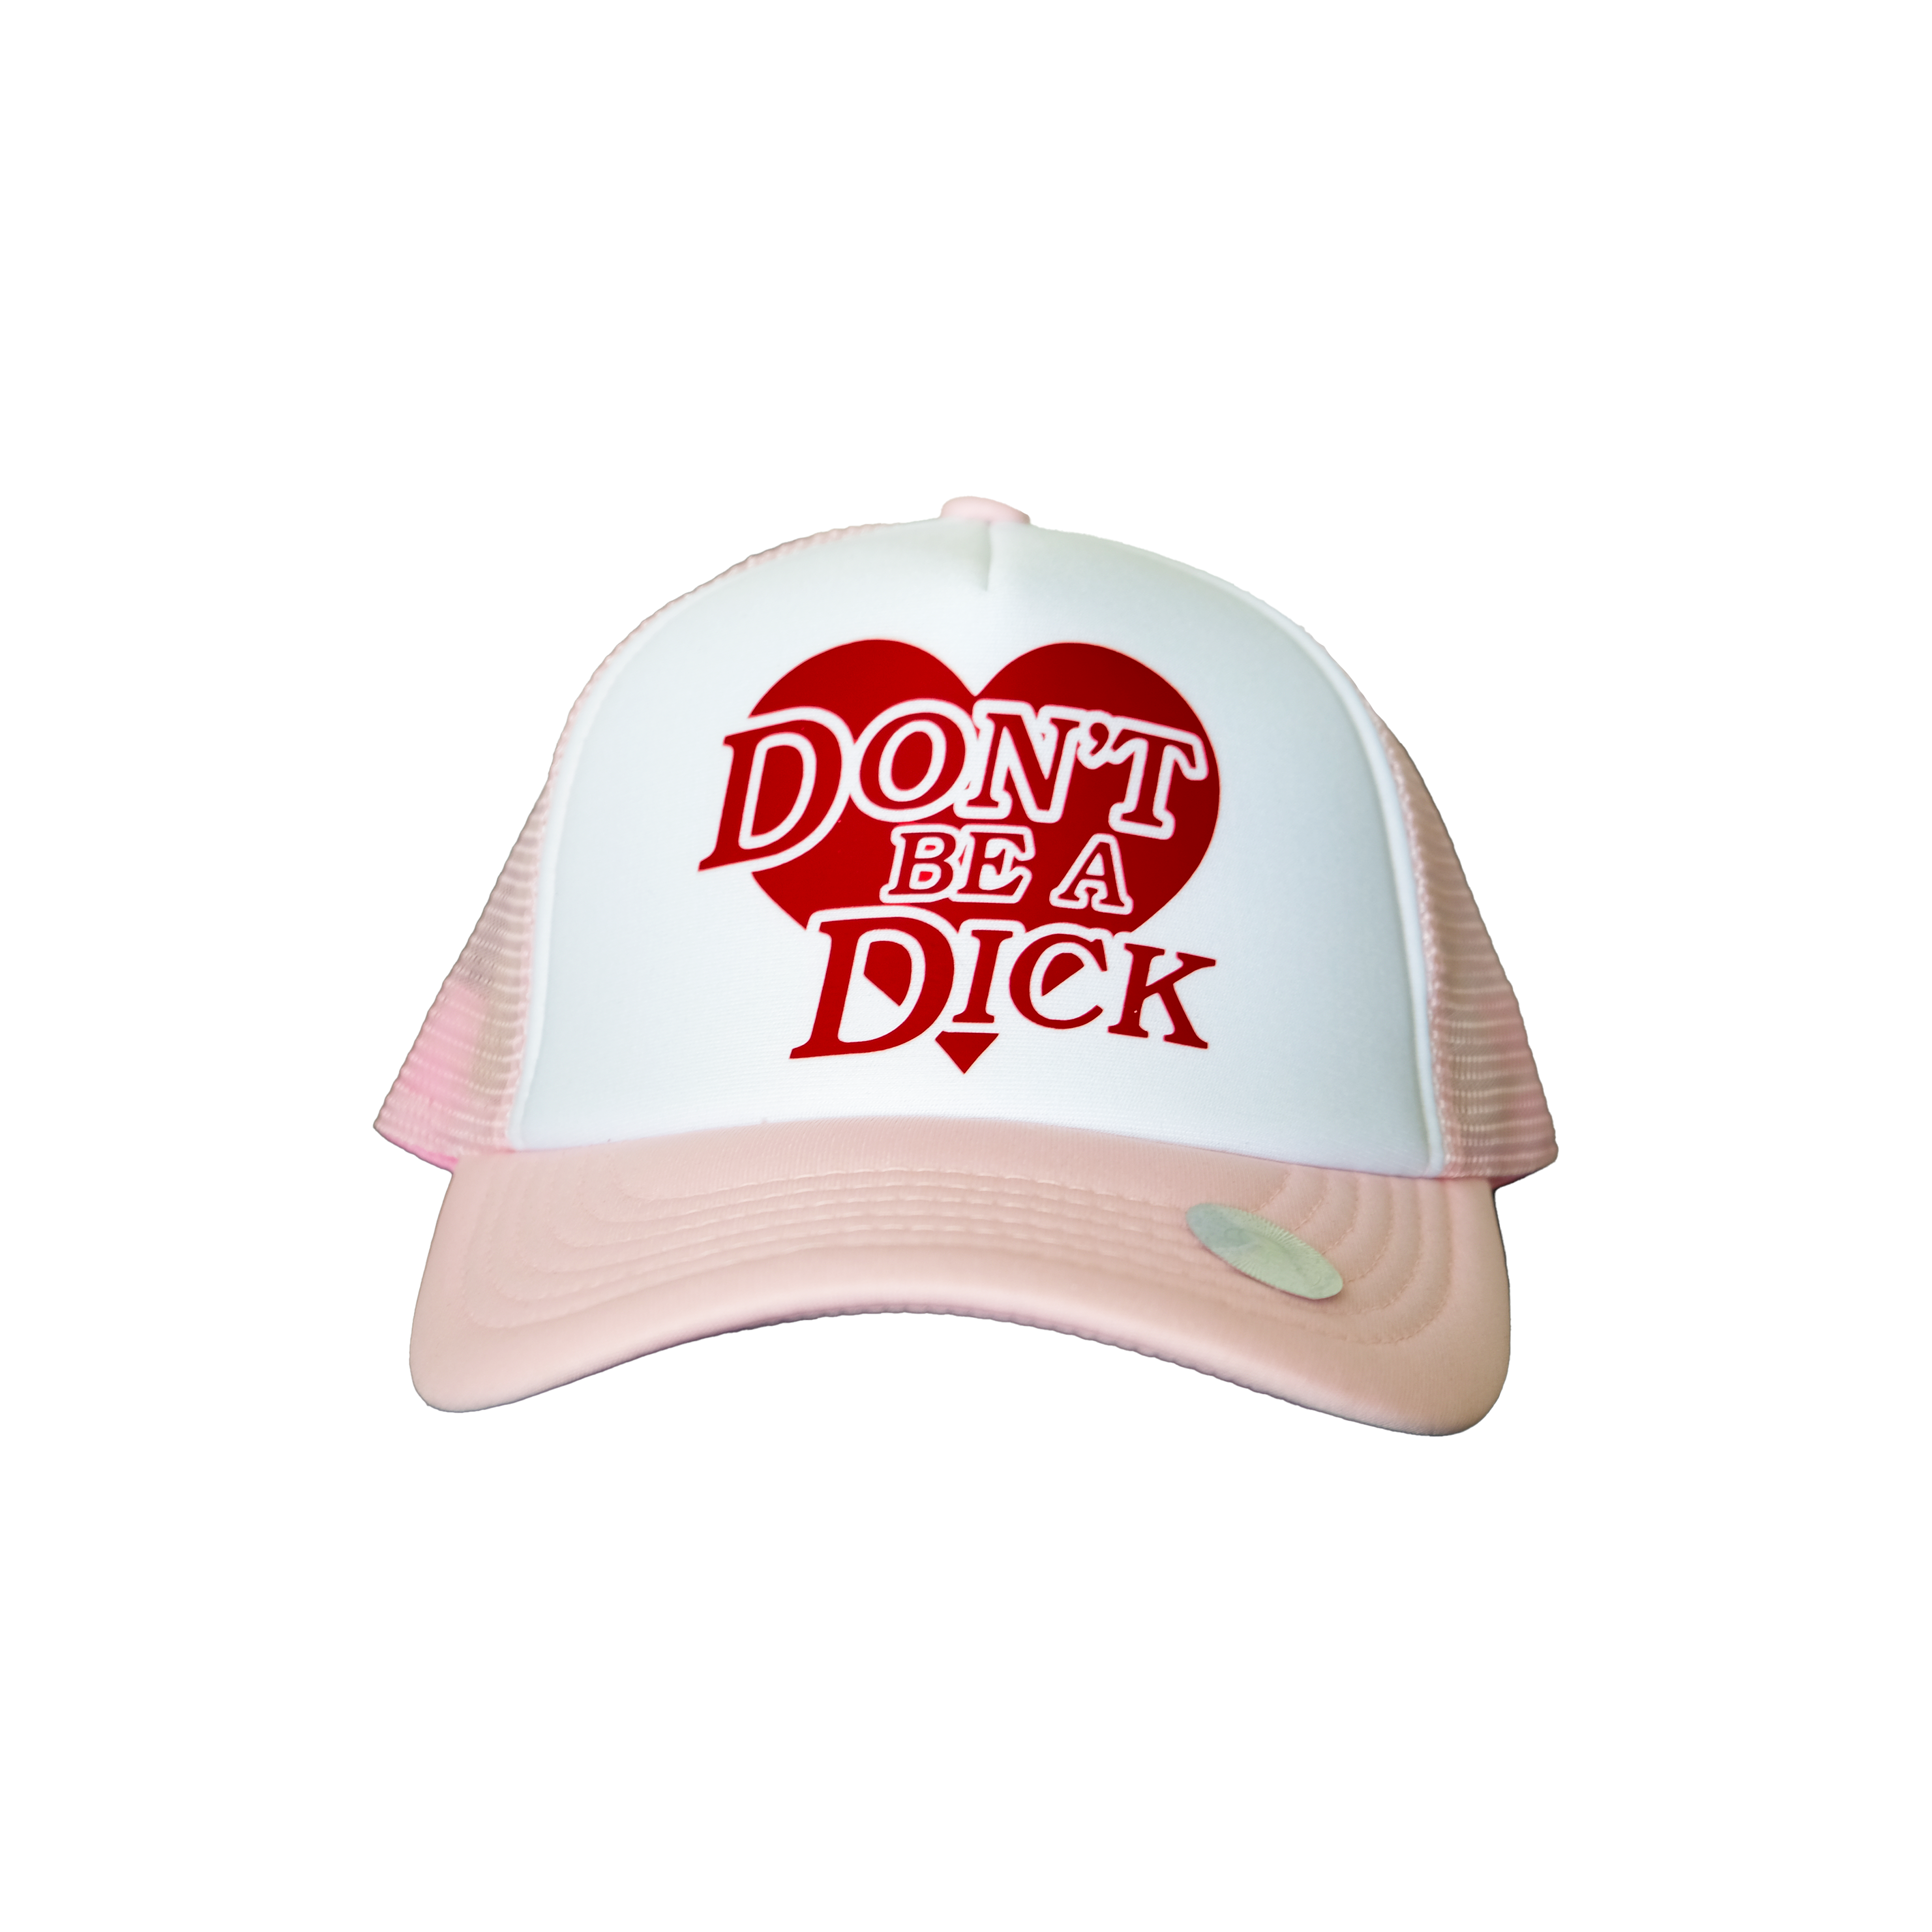 DON'T BE A DICK TRUCKER